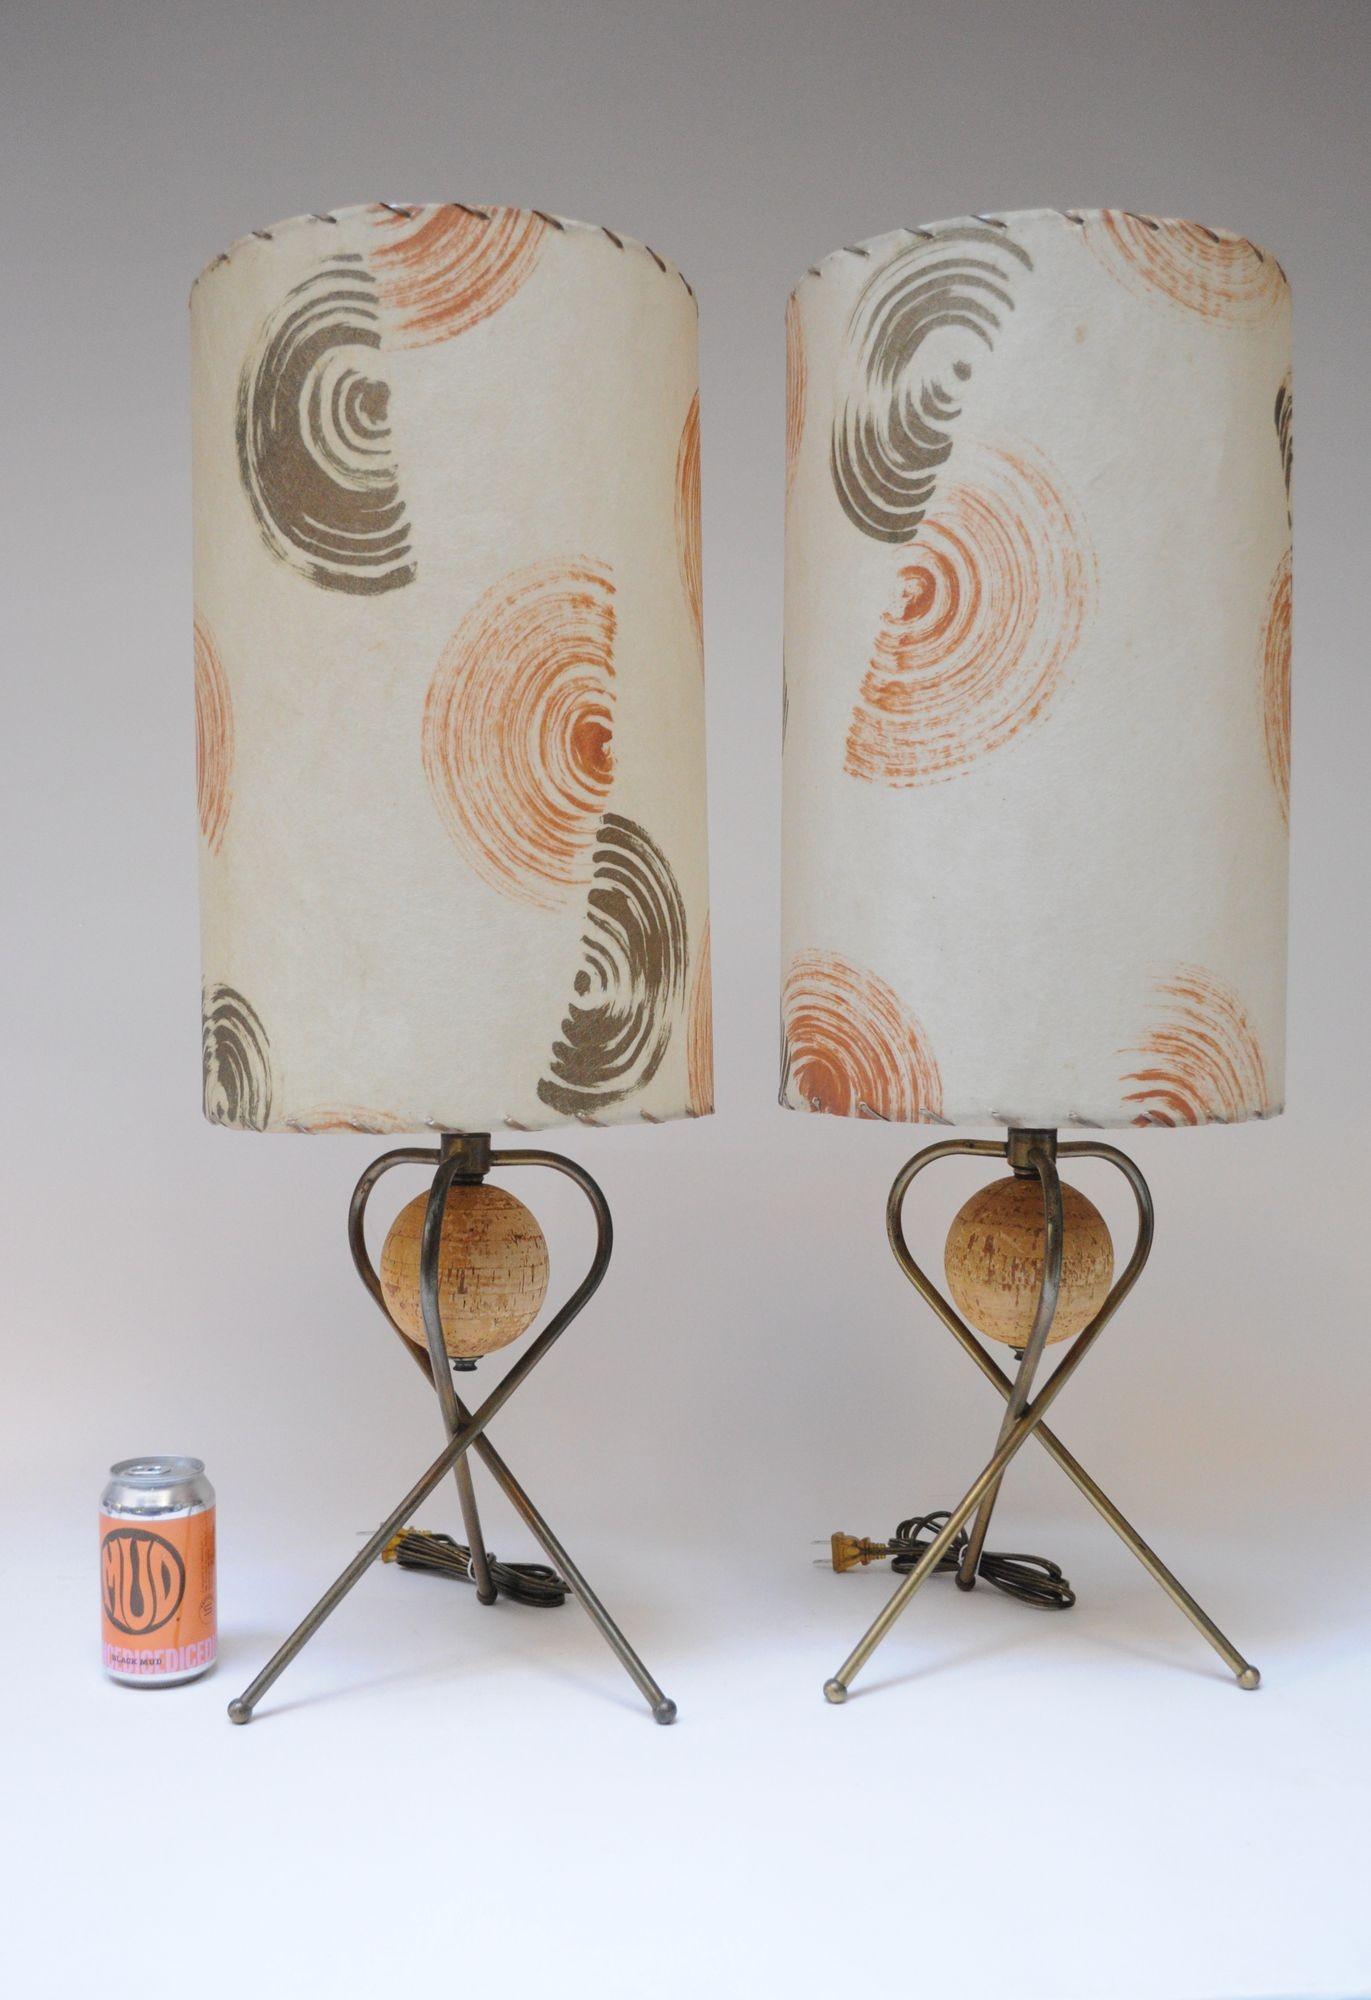 Pair of Modernera Cork and Brass Tripod Table Lamps with Fiberglass Shades In Good Condition For Sale In Brooklyn, NY